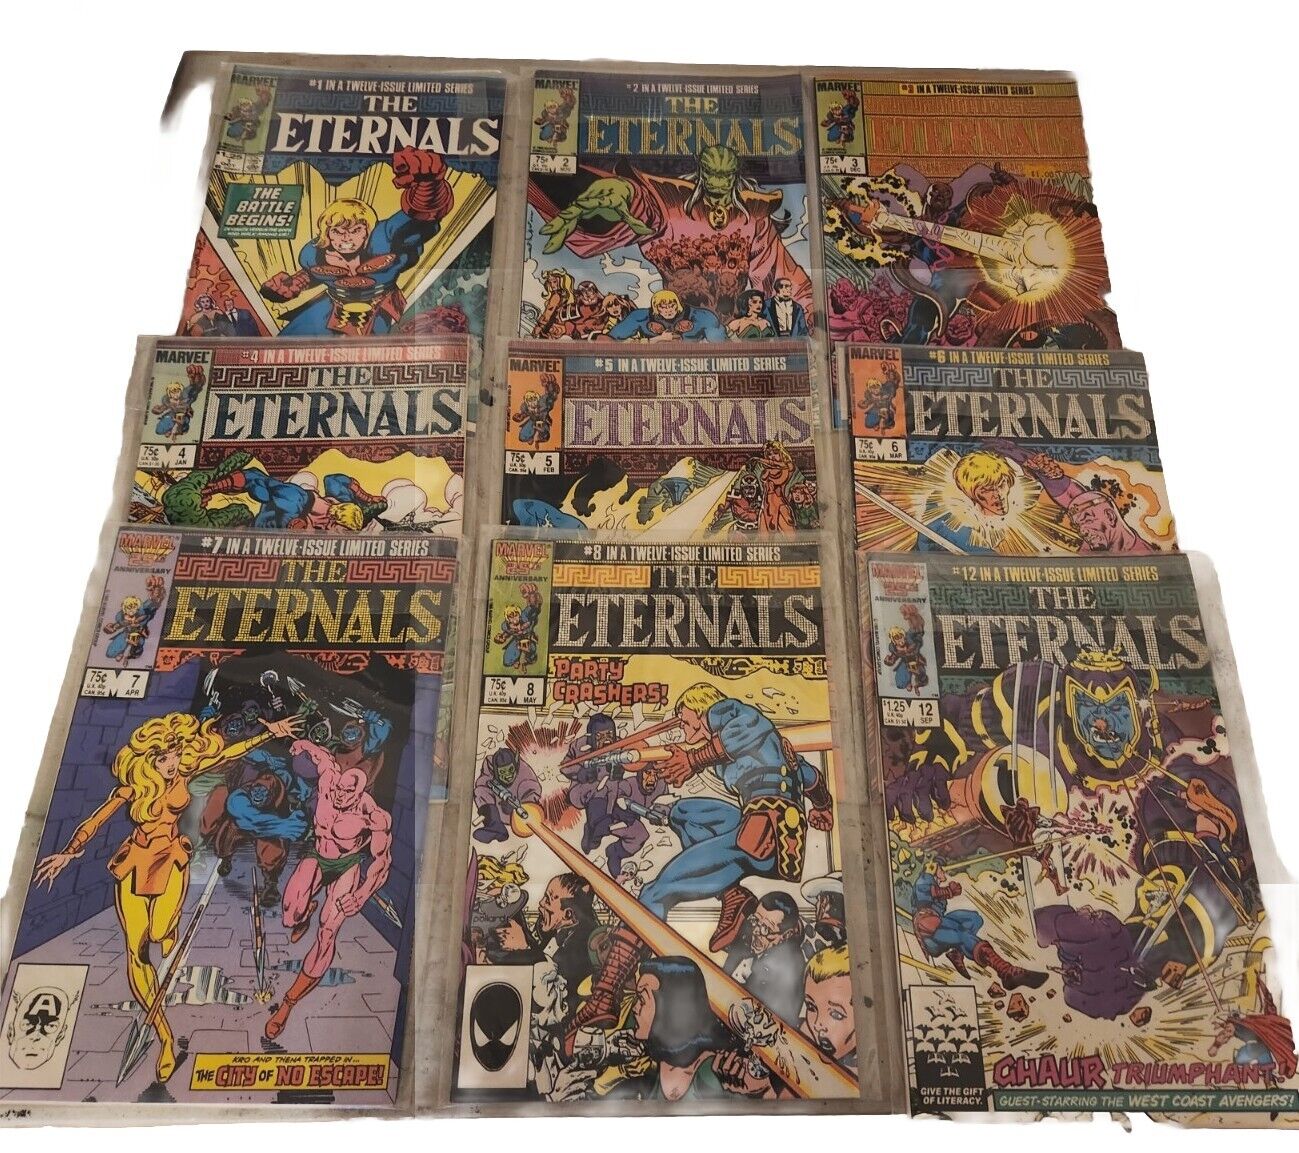 The Eternals #1-8 & 12 VG Condition, Marvel Comics lots of 1st Appearances